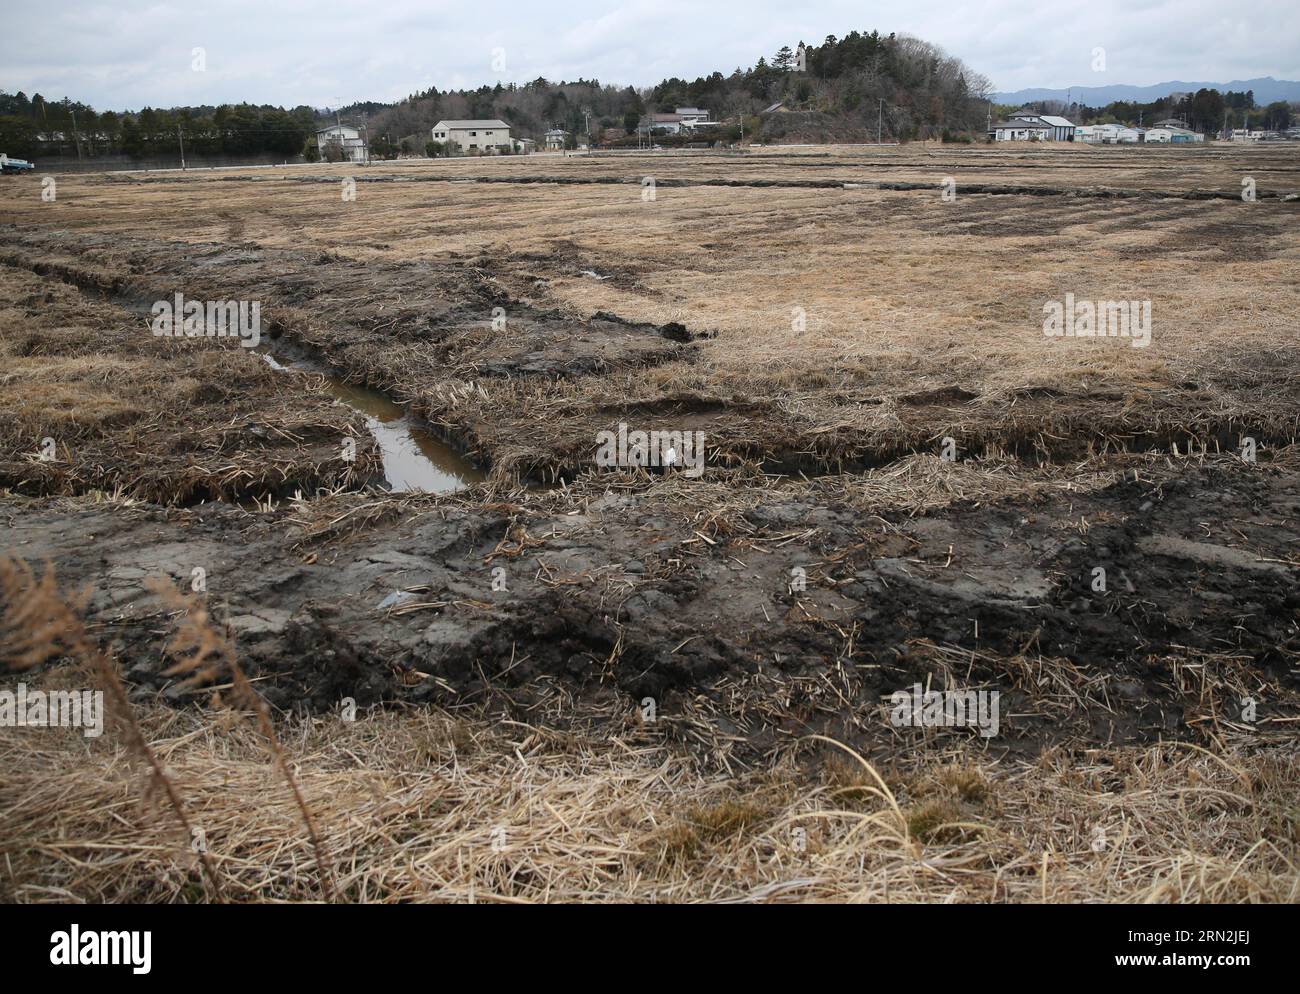 (150310) -- FUKUSHIMA, March 10, 2015 -- Damaged fields and houses are seen in the Futaba District, located well within the 20-kilometer exclusion radius around the leaking facilities of Fukushima Daiichi nuclear power plant, in Fukushima Prefecture, Japan, March 7, 2015. The scenes from the towns and villages still abandoned four years after an earthquake triggered tsunami breached the defenses of the Fukushima Daiichi nuclear power plant, would make for the perfect backdrop for a post- apocalyptic Hollywood zombie movie, but the trouble would be that the levels of radiation in the area would Stock Photo